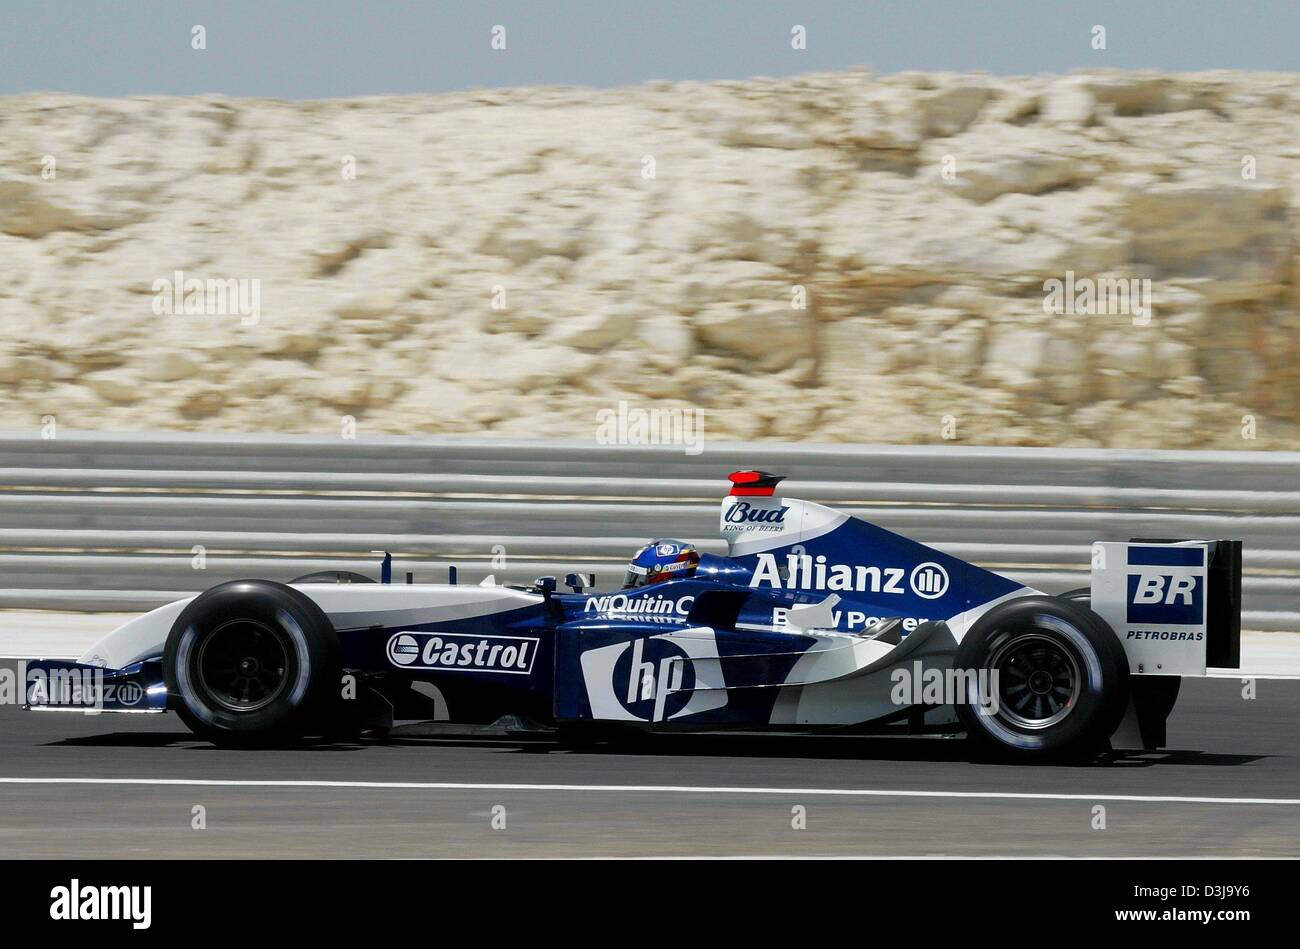 (dpa) - Colombian formula one pilot Juan Pablo Montoya of BMW-Williams steers his bolide along the tarmac of the formula one race course in Manama, Bahrain, on Friday, 2 April 2004. Montoya drove the fourth fastest time in the free practise session in Bahrain. The Formula 1 Grand Prix of Bahrain will take place for the first time this Sunday, 4 April 2004. Stock Photo